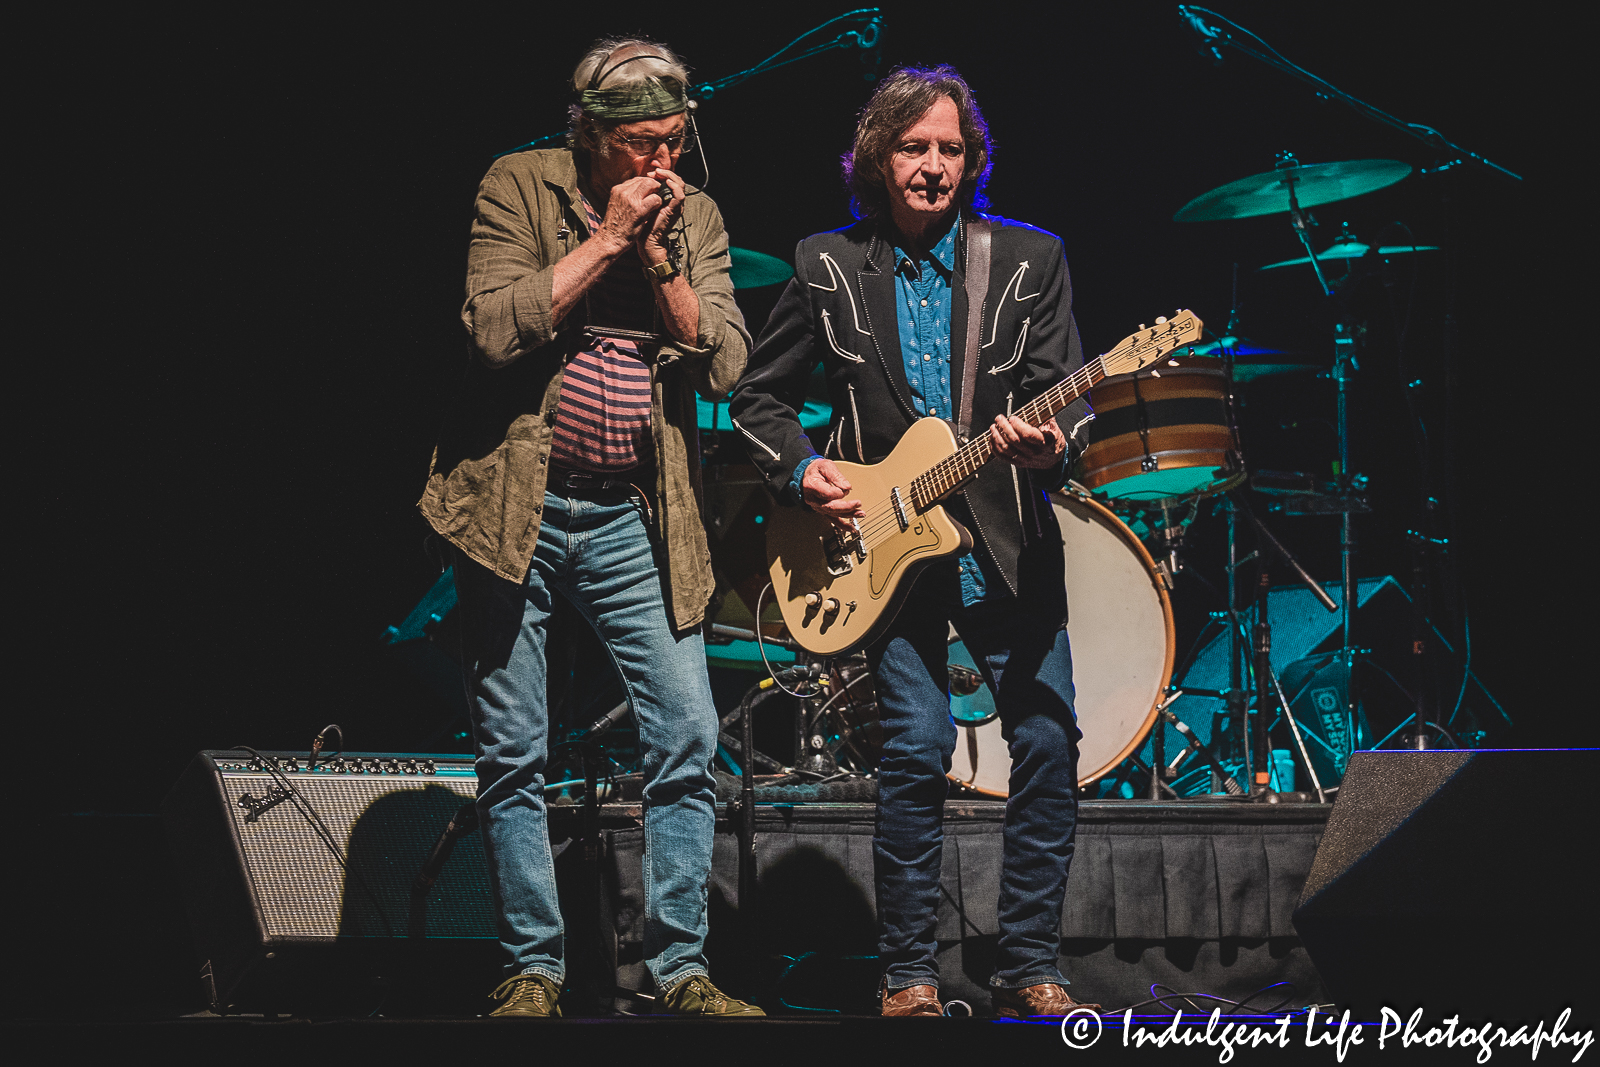 Jimmie Fadden and Jeff Hanna of Nitty Gritty Dirt Band in concert together at Ameristar Casino's Star Pavilion in Kanas City, MO on July 8, 2023.